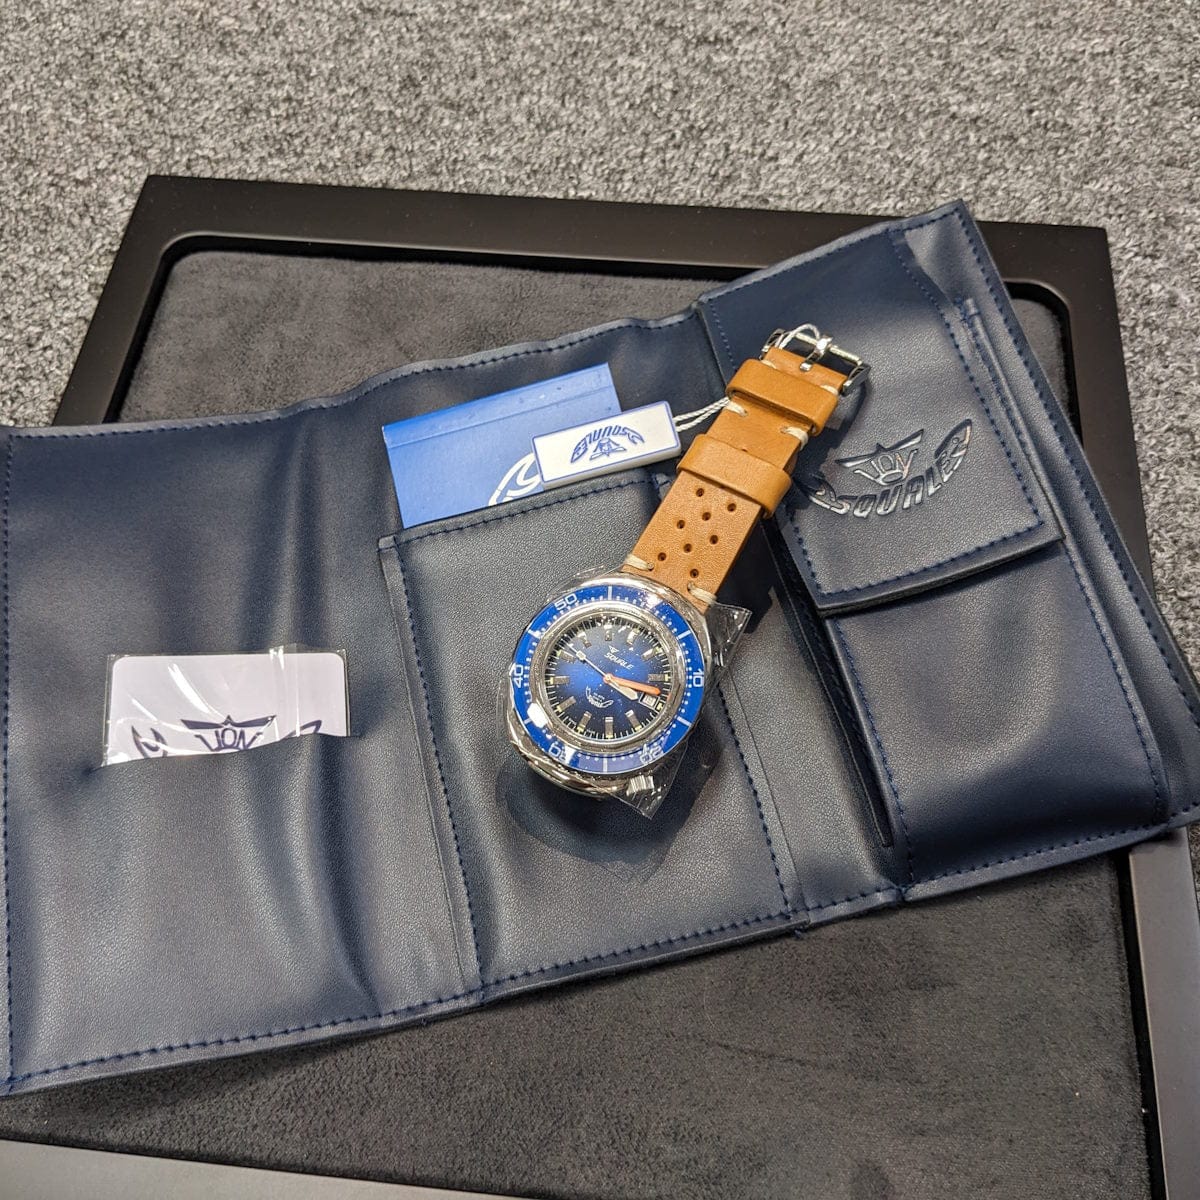 Squale 2002, Polished Case, Blue Sapphire Bezel, Blue Dial, Tan Leather - NEARLY NEW